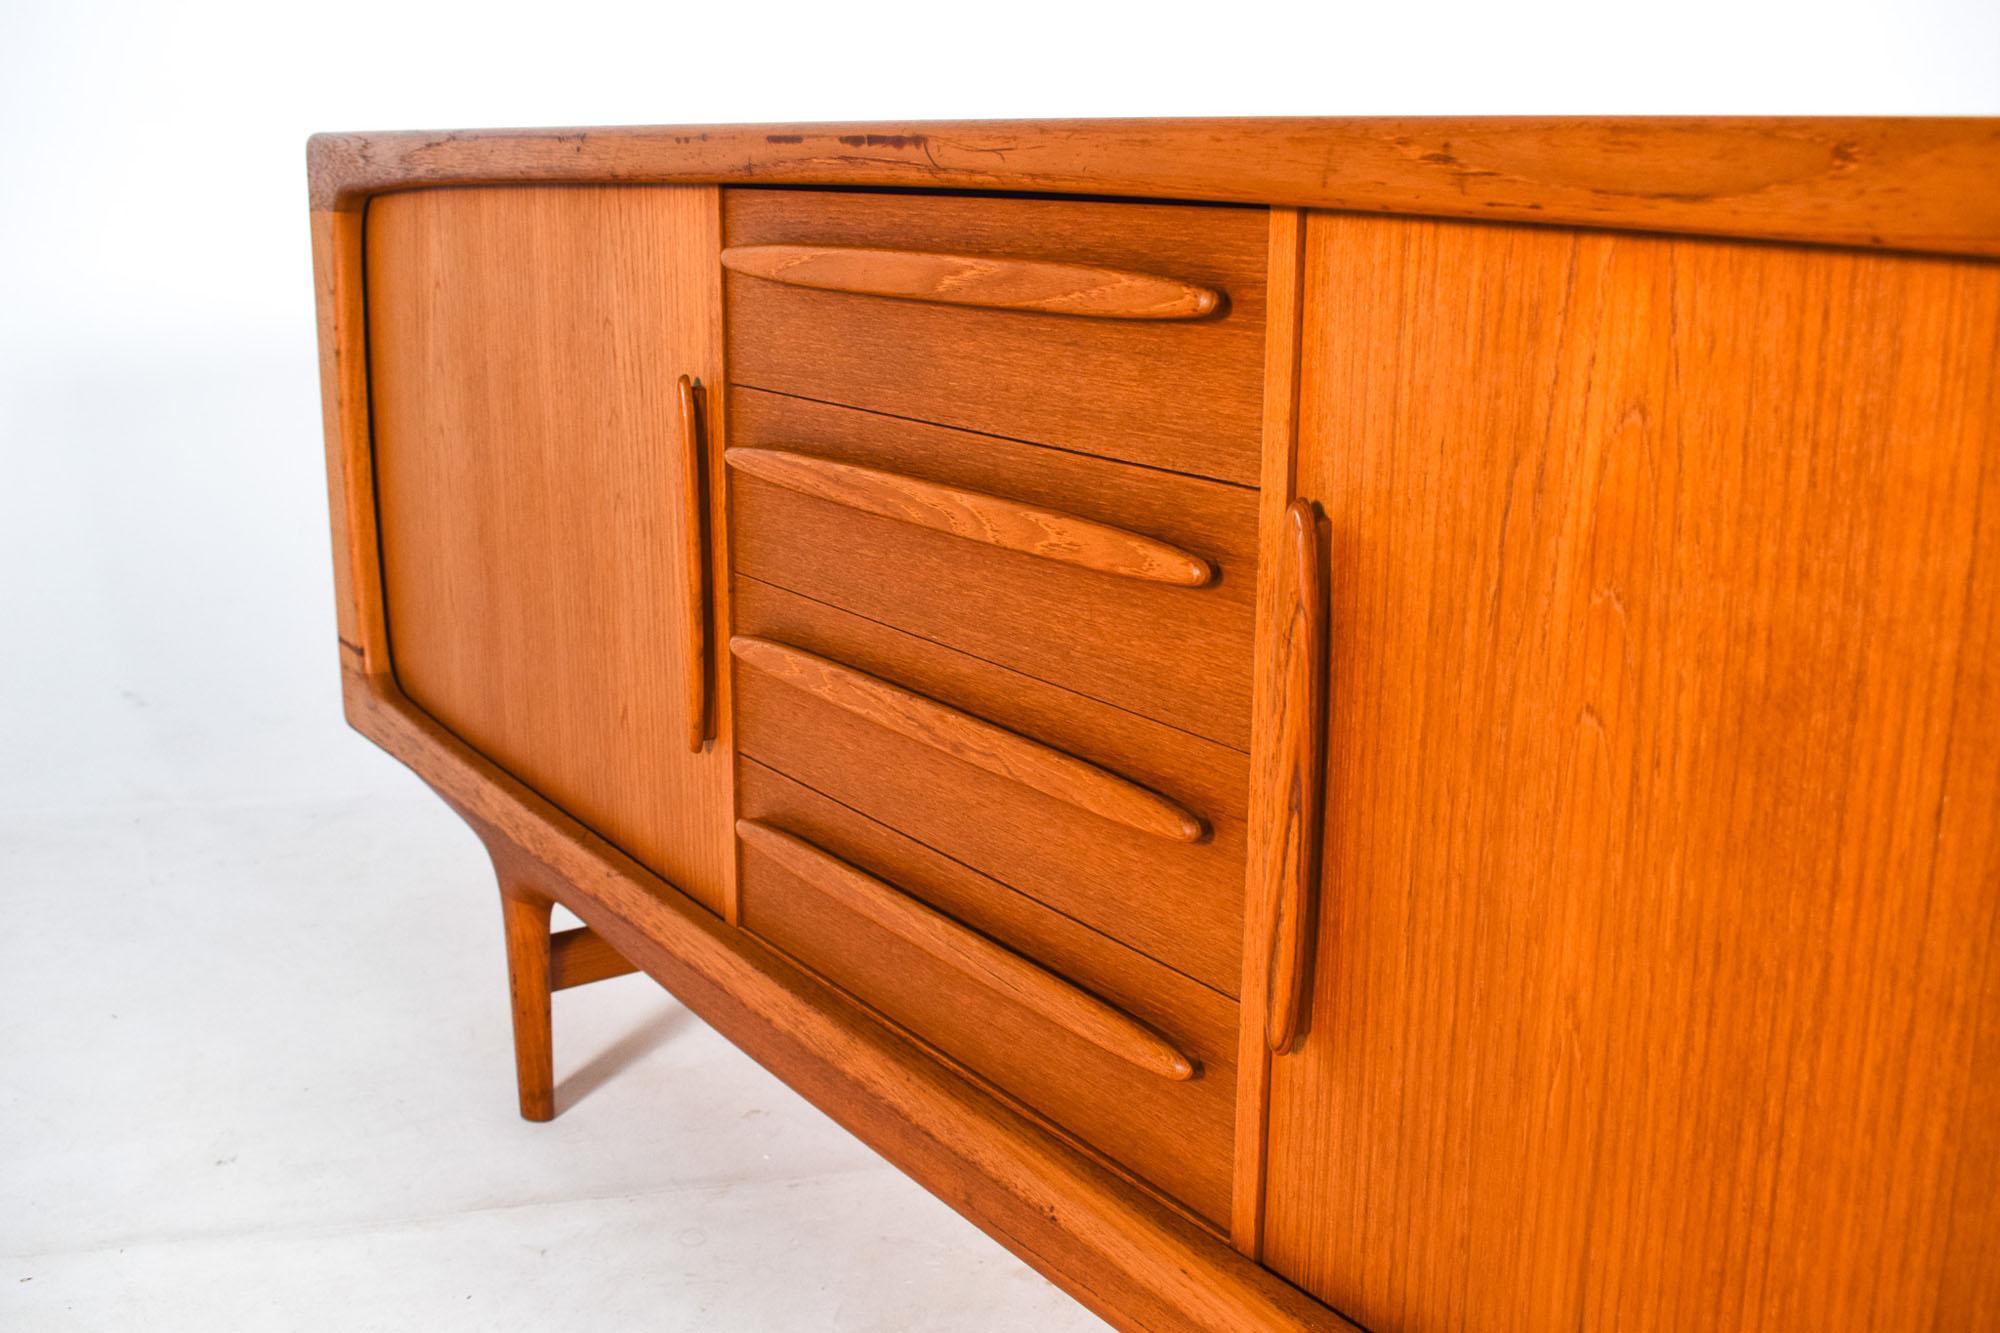 This model 230 teak sideboard was designed by Johannes Andersen for Silkeborg. Manufactured in Denmark in the 1960s. Four large center drawers are flanked by a pair of beautiful tambour doors. The sideboard revealing a work of great quality with